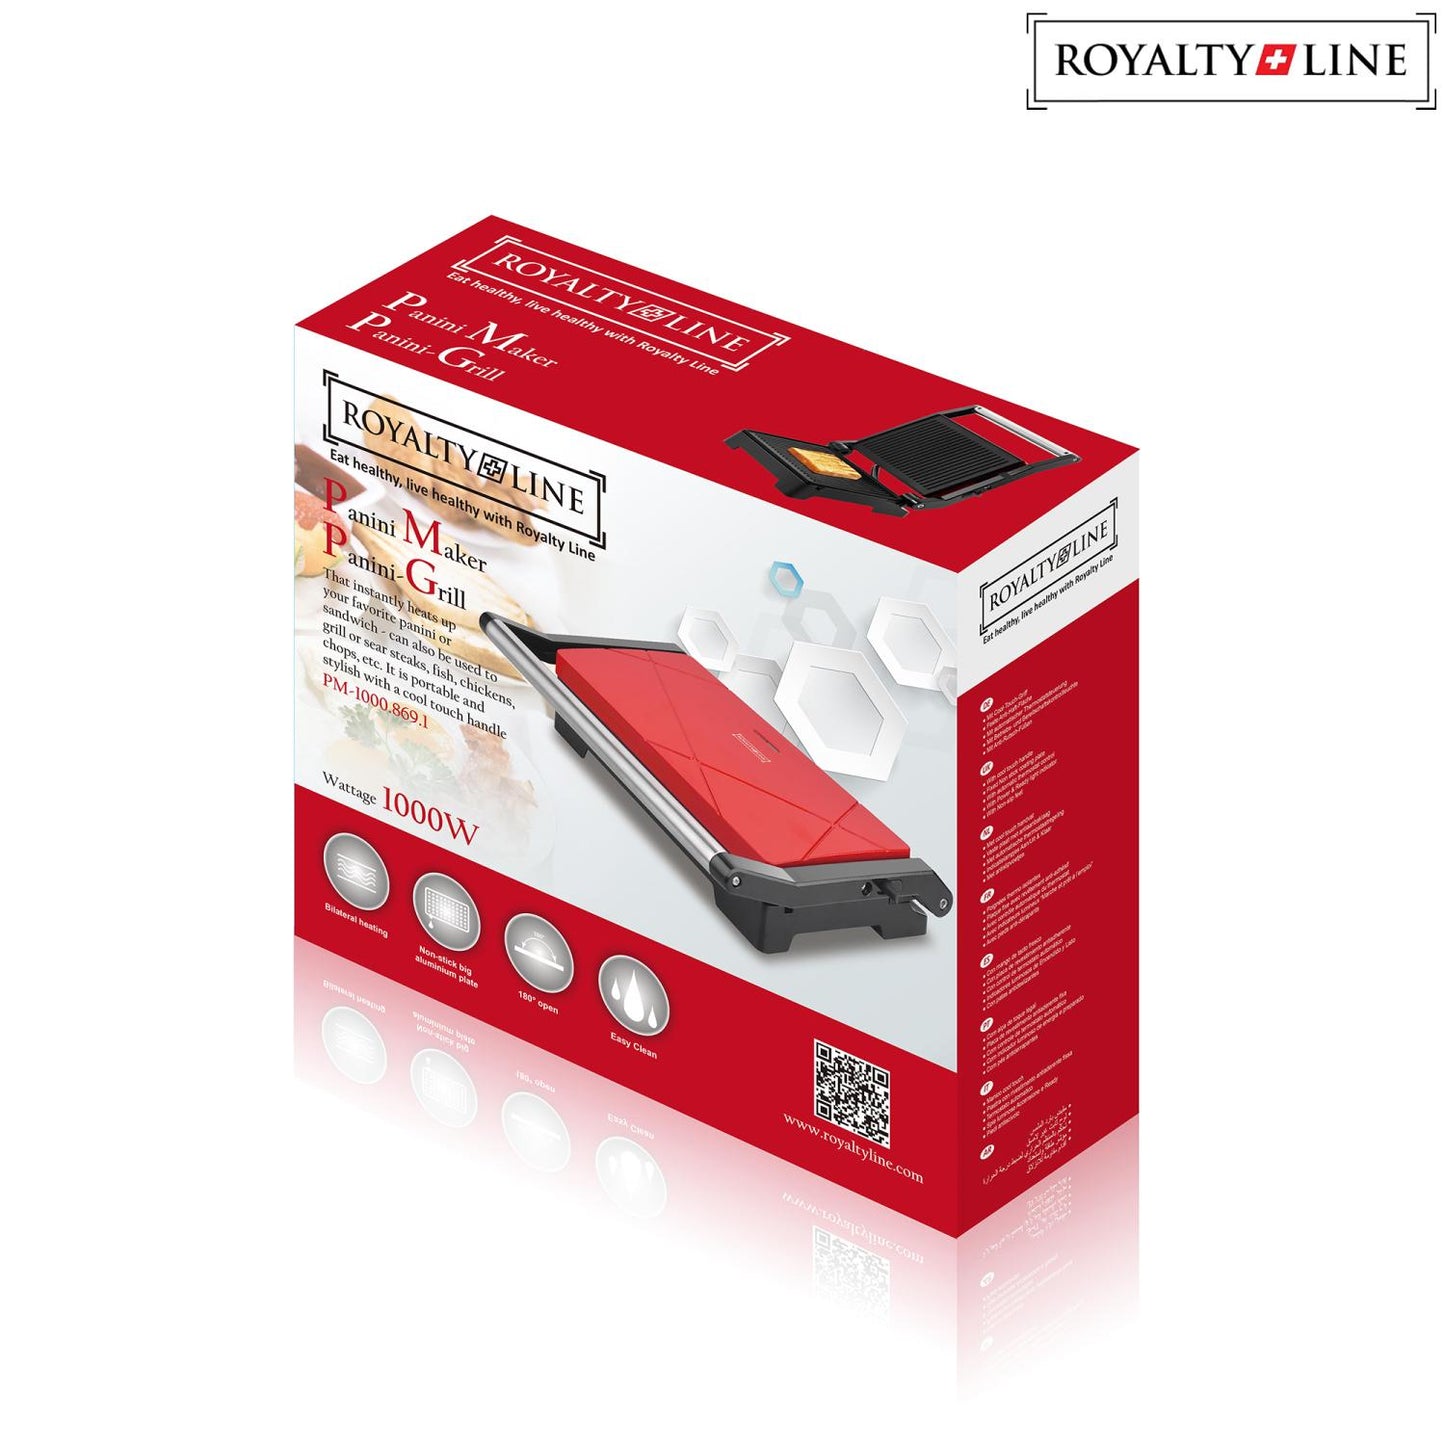 Royalty Line Toaster Grill 1000W Black